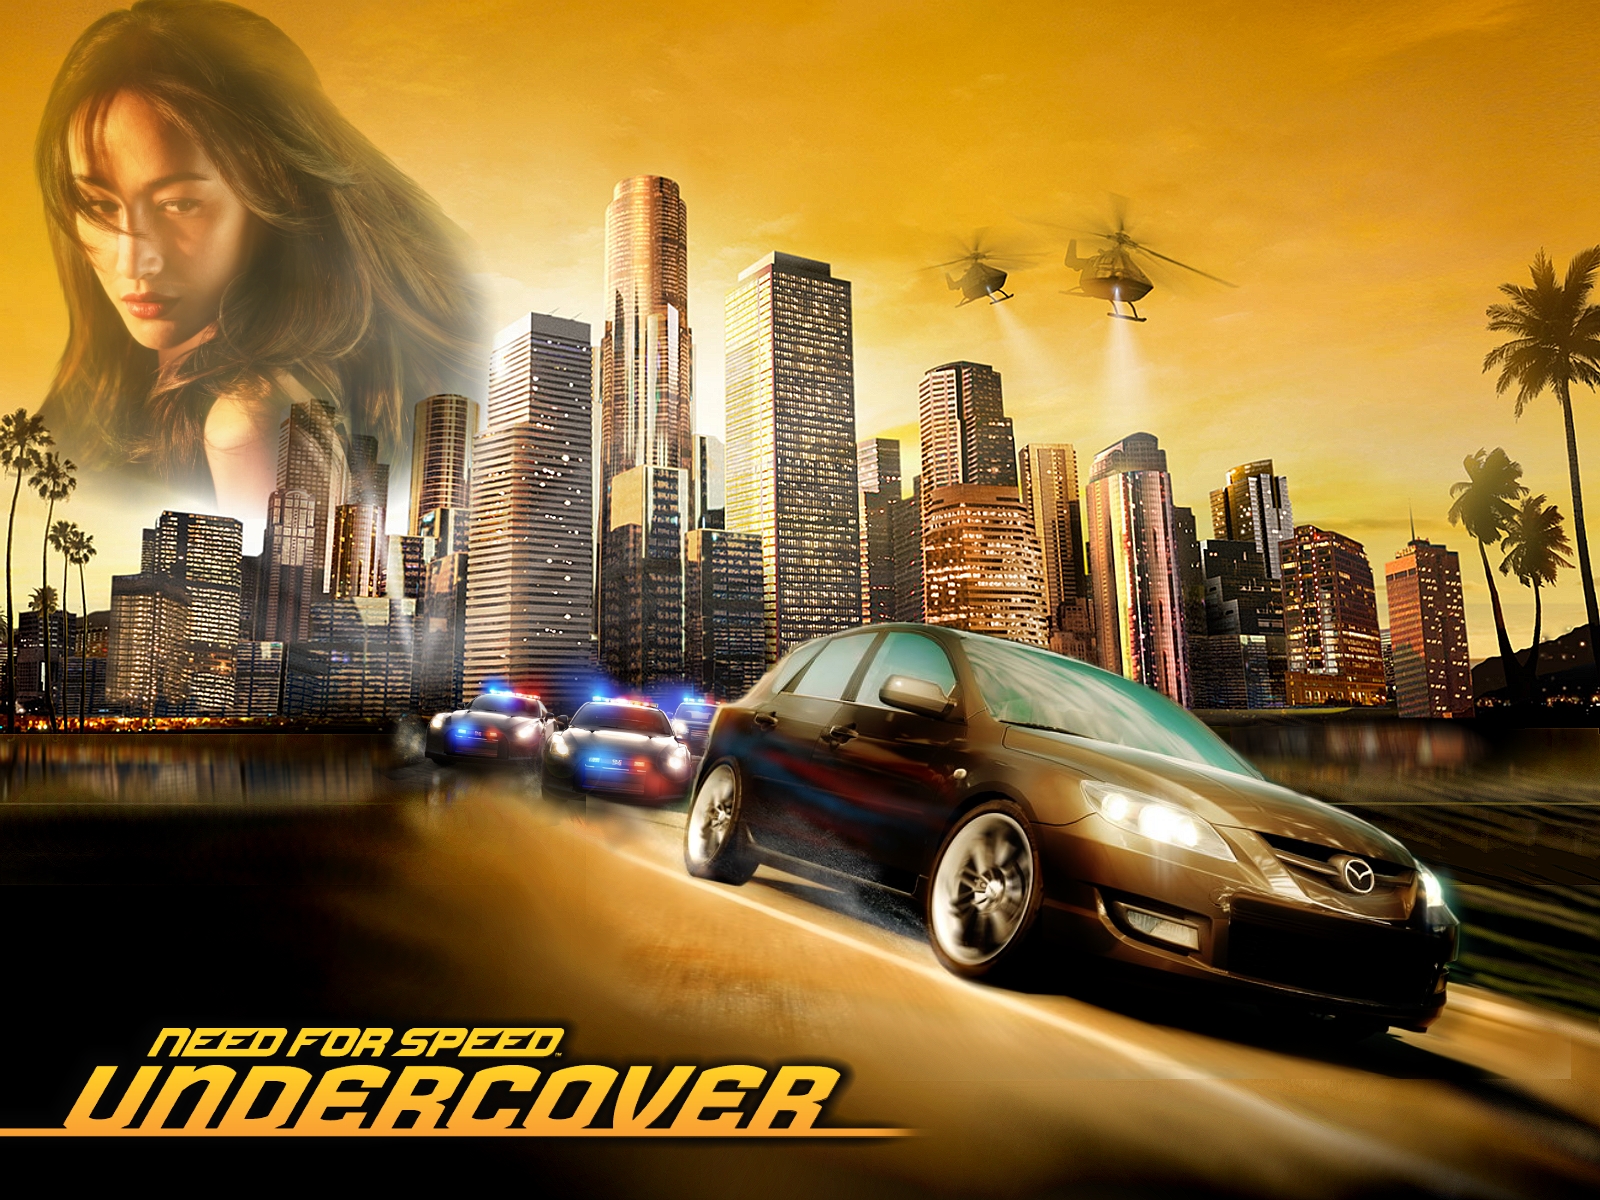 Need for speed world offline crack free download